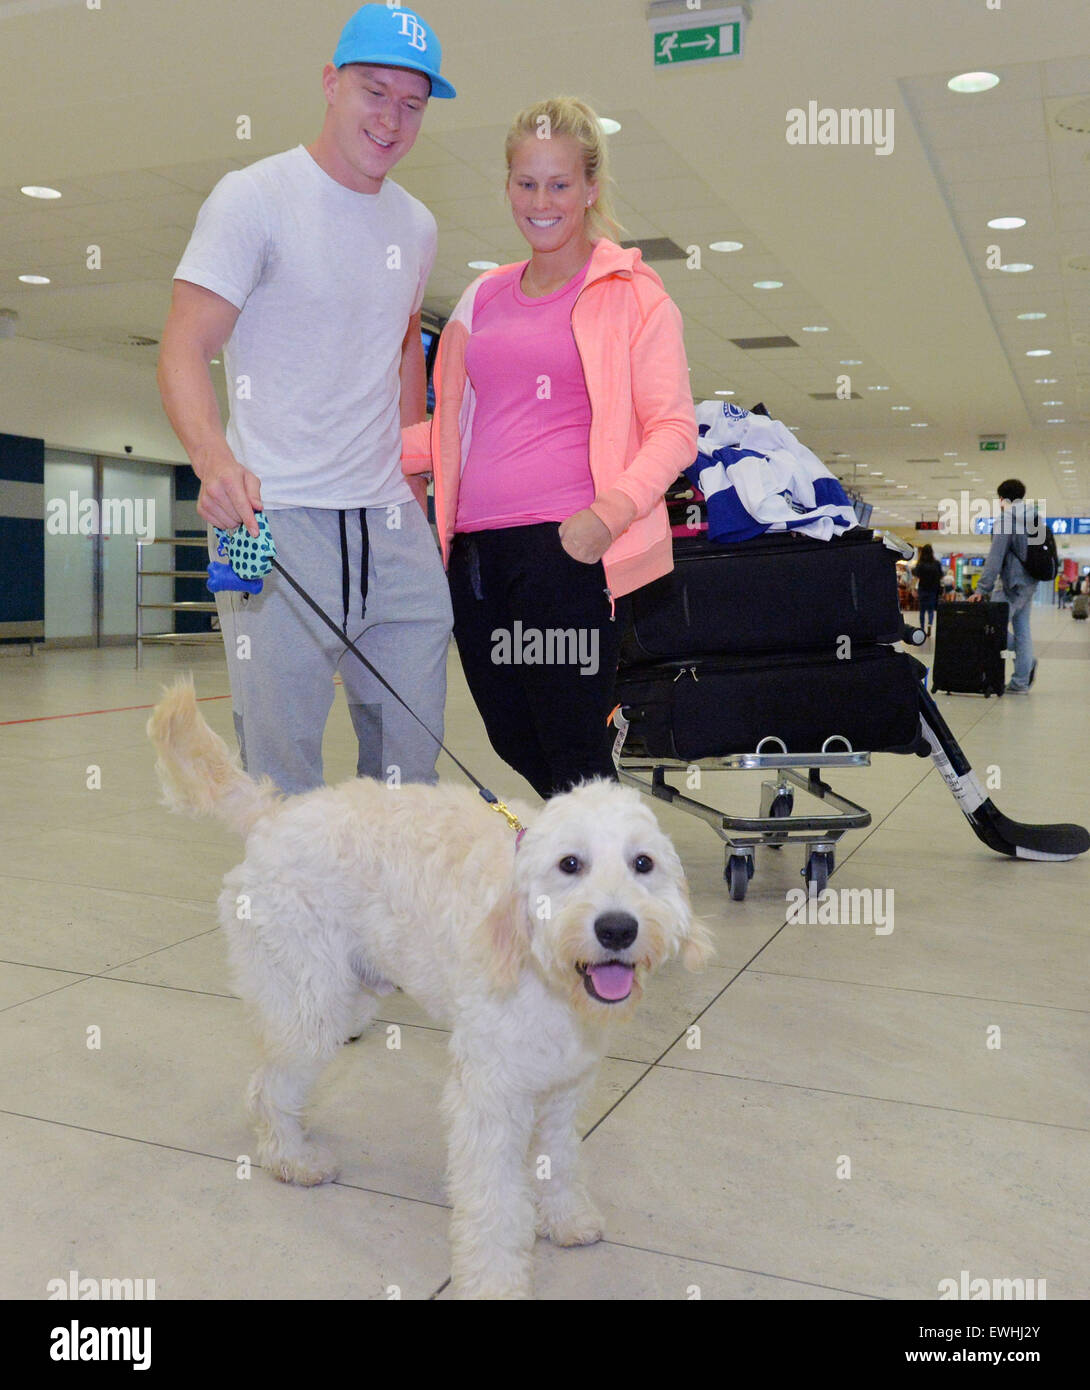 Prague, Czech Republic. 26th June, 2015. Hockey Stanley Cup finalist Ondrej  Palat of Tampa Bay arrives with his partner Barbora Bartikova and dog Snowy  in Prague, Czech Republic, June 26, 2015. ©